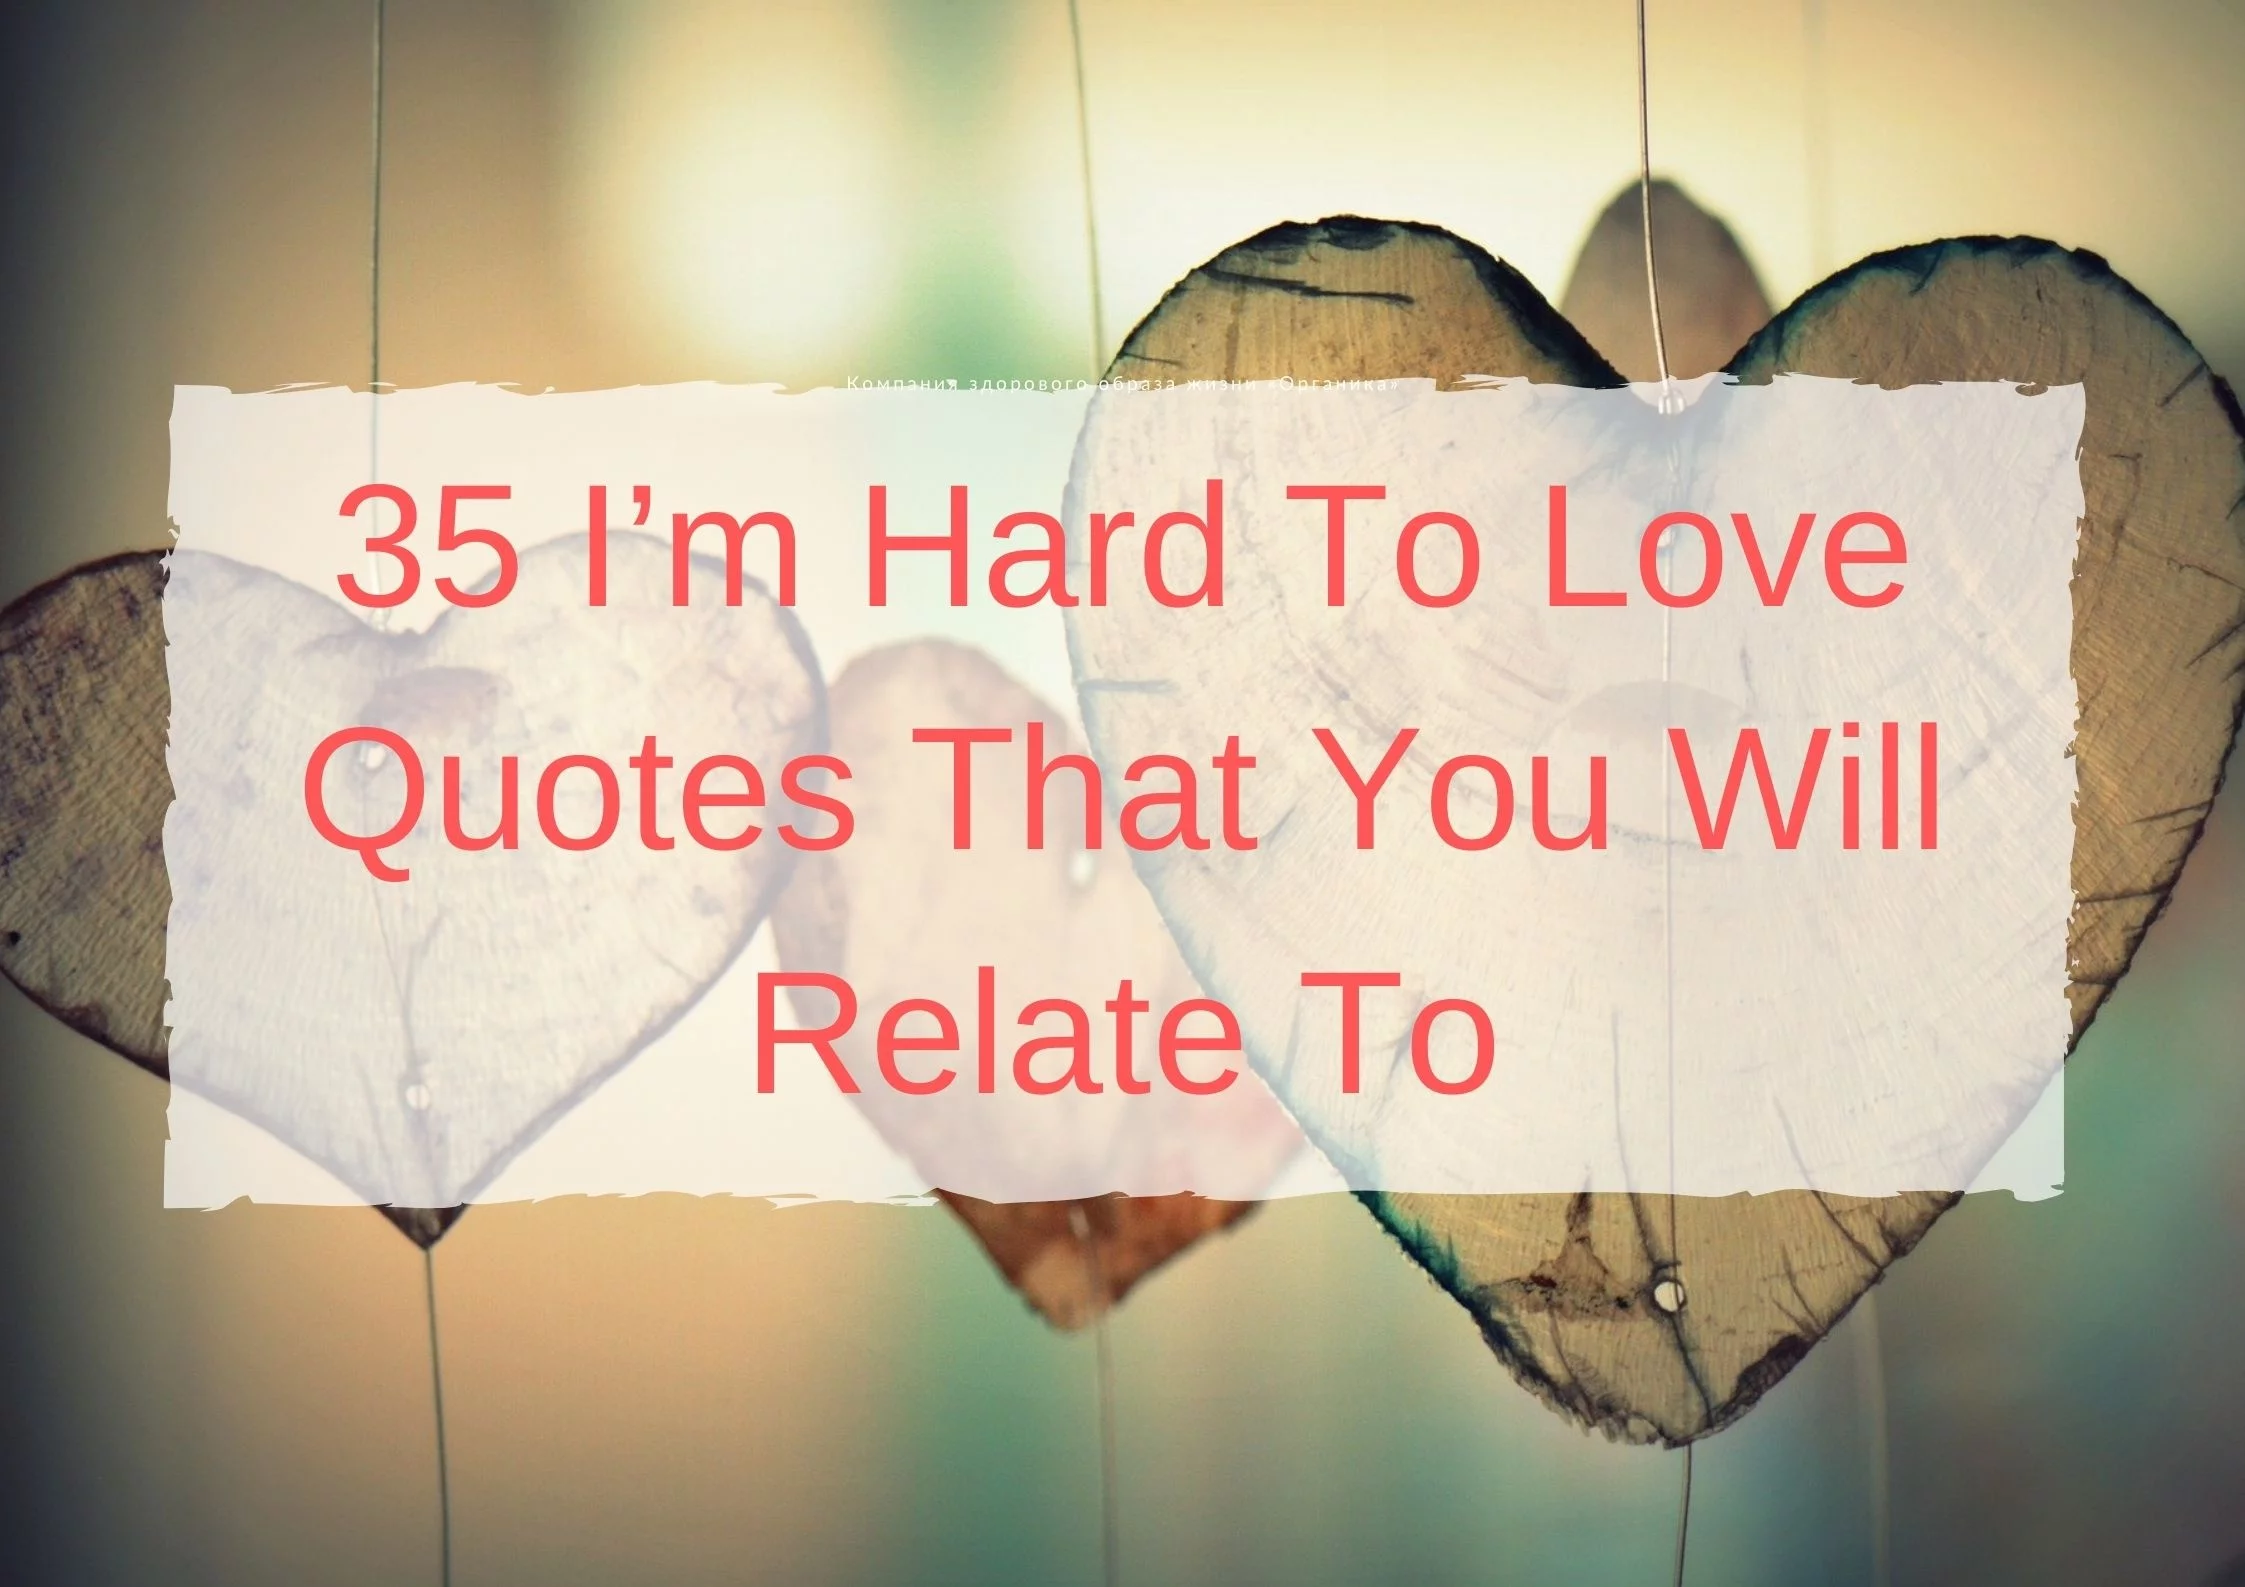 35 I’m Hard To Love Quotes That You Will Relate To